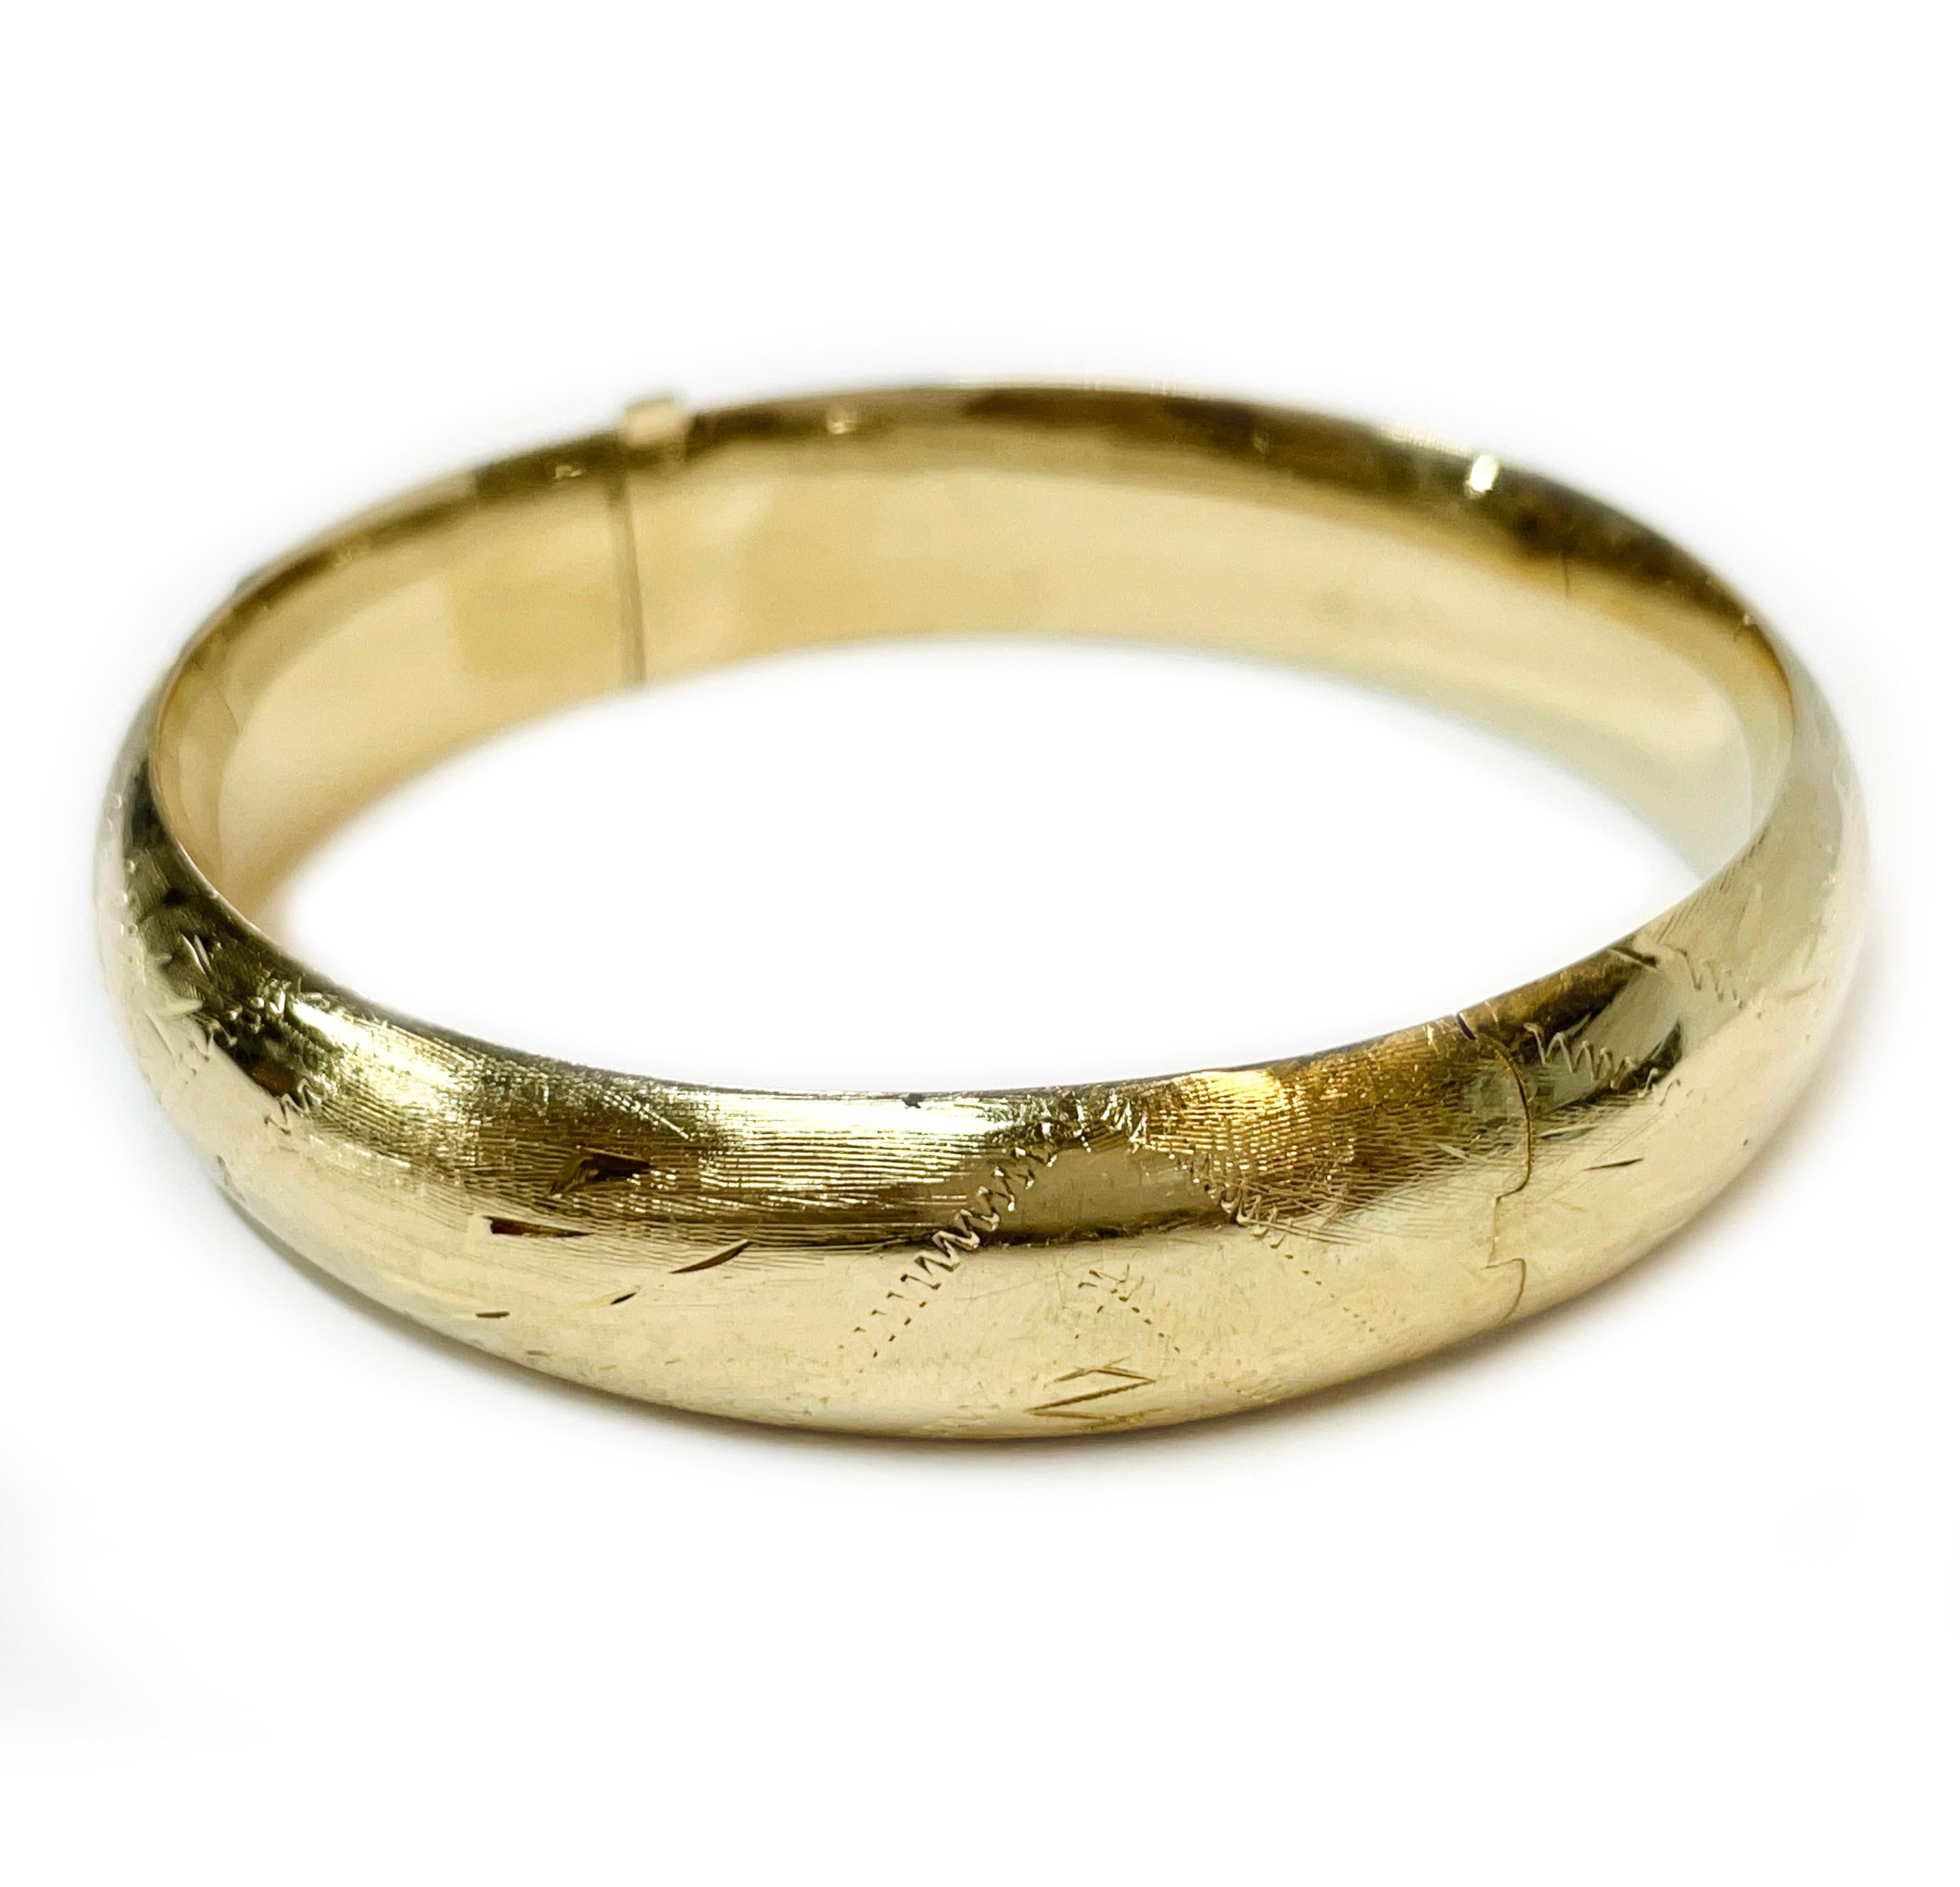 14 Karat Yellow Gold Diamond-Cut Bangle Bracelet. The hollow bracelet has diamond-cut accents and leaf and zig-zag designs with a textured and smooth finish. Stamped on the hinge of the bangle is 14K. The bracelet is 13.0mm wide. The bangle diameter